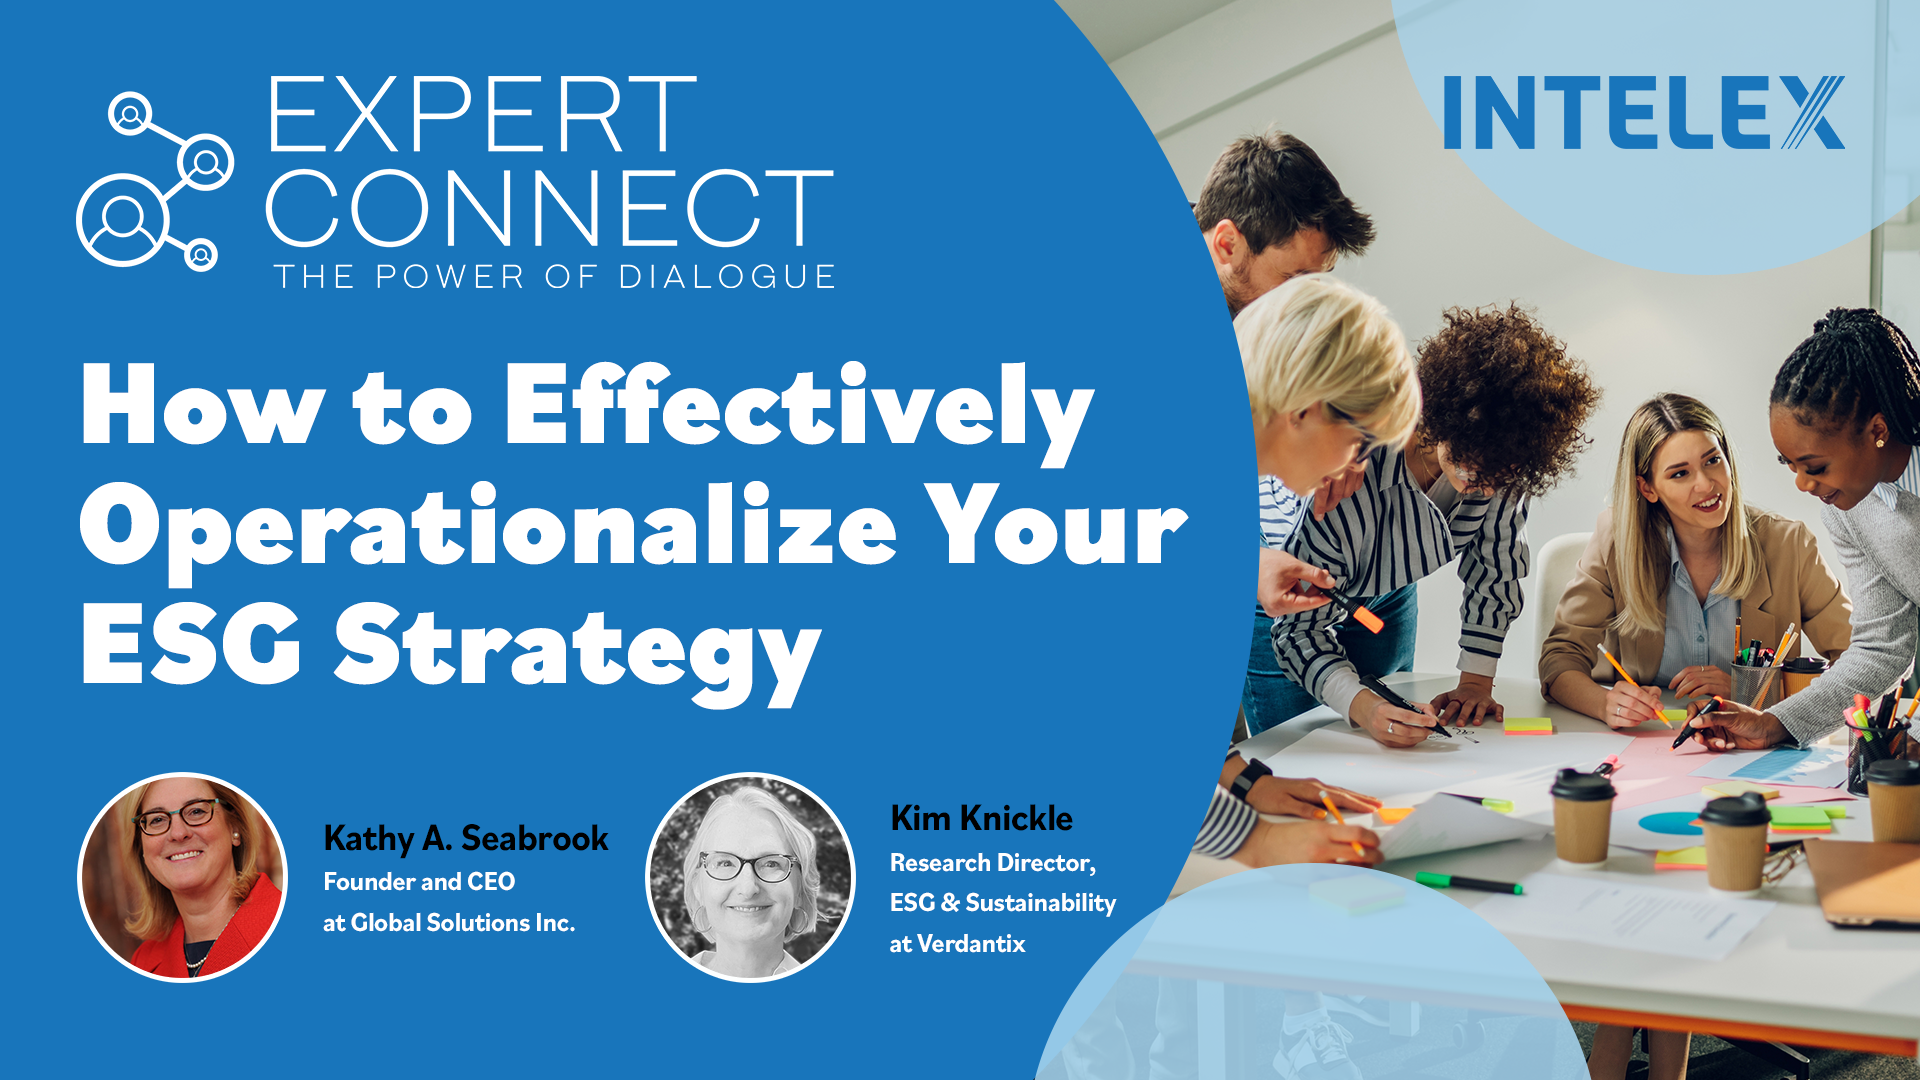 Expert Connect – How to Effectively Operationalize ESG Strategy